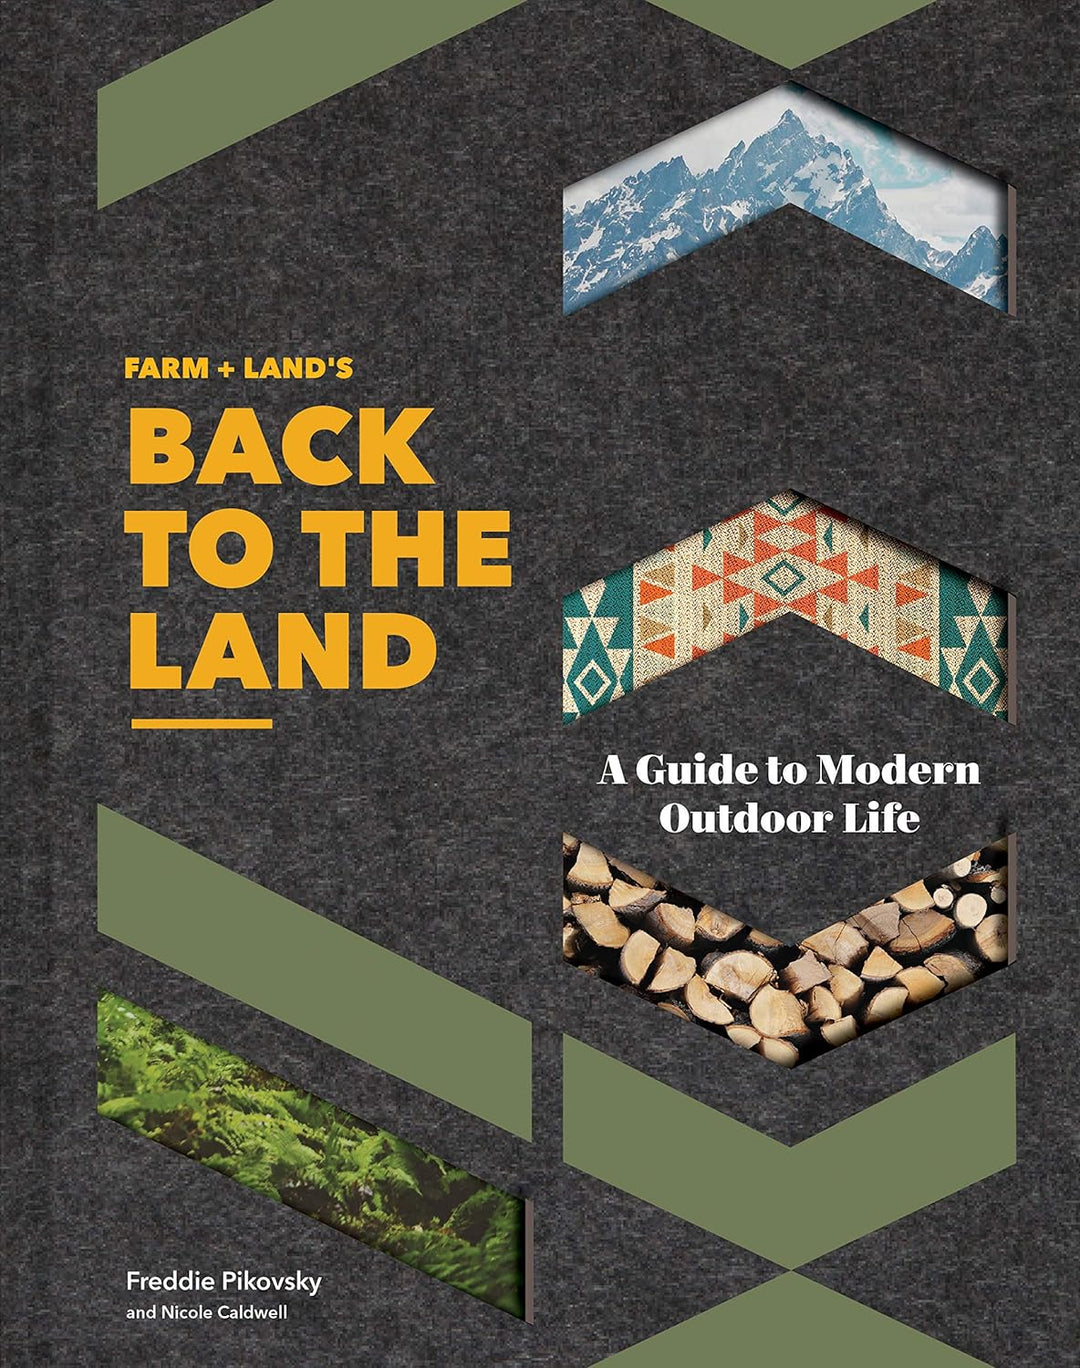 Farm + Land's Back to the Land A Guide to Modern Outdoor Life